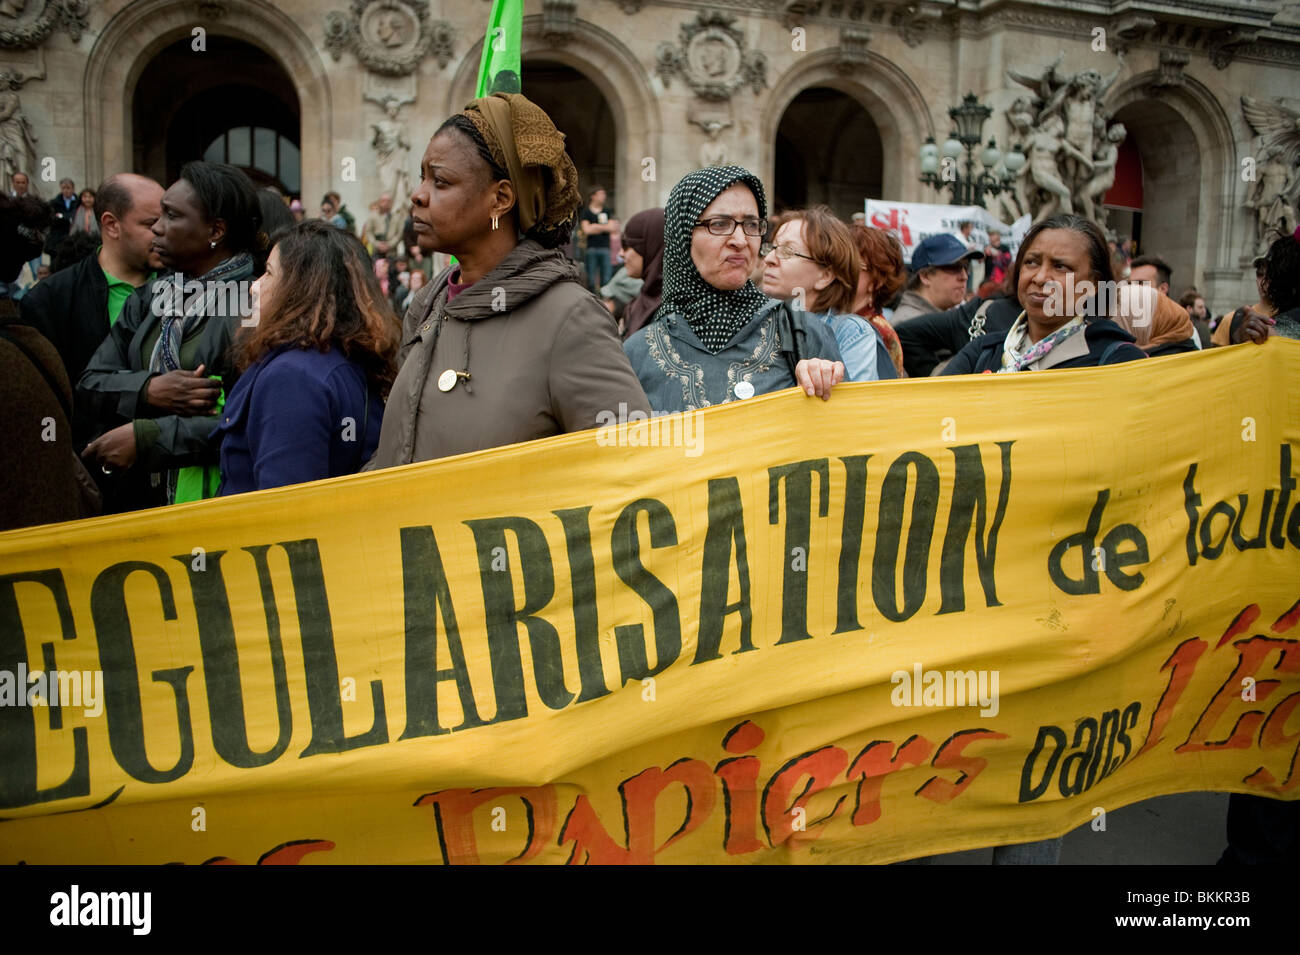 Crowd Arab Women Demonstrating in May 1, May Day Demonstration, Paris, France, 'Sans Papiers' Illegal Migrants Holding Protest Banner on Street, immigrants Europe, integrated, Women in Veil, immigration protests Stock Photo